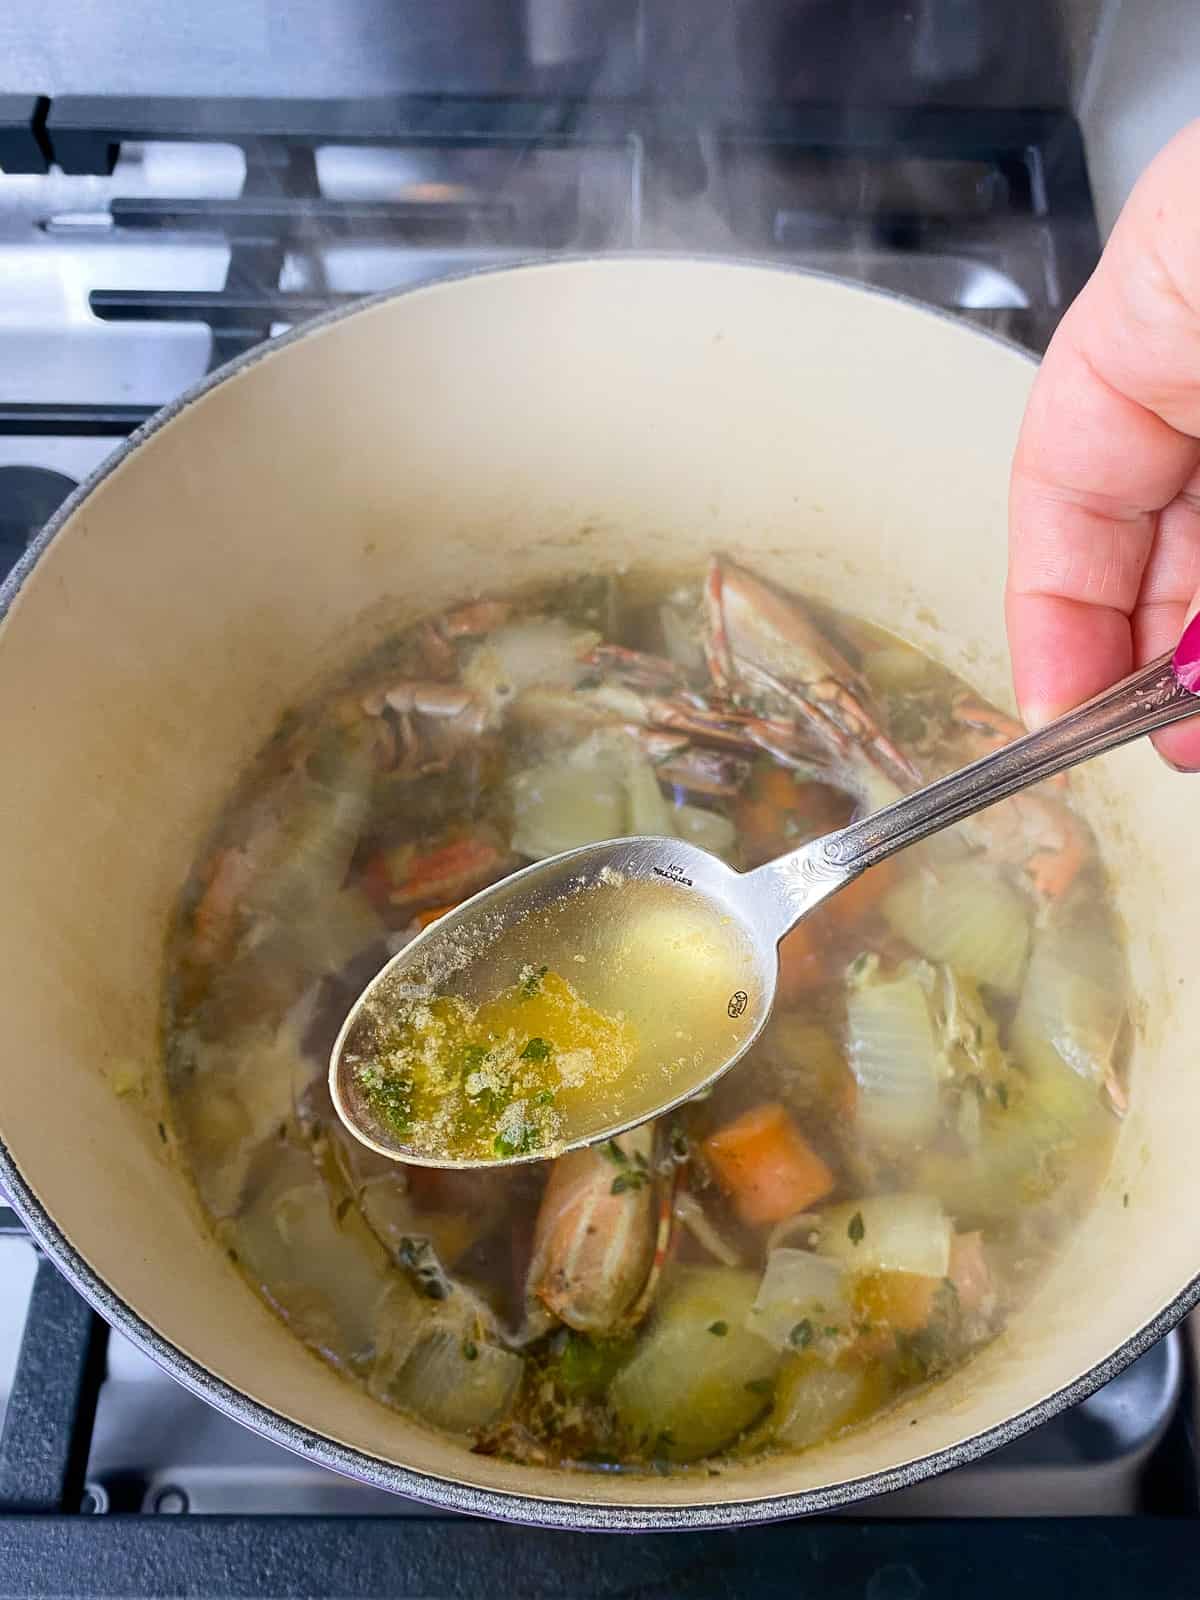 Use a spoon to skim away any impurities and foam that float to the top of the seafood stock.